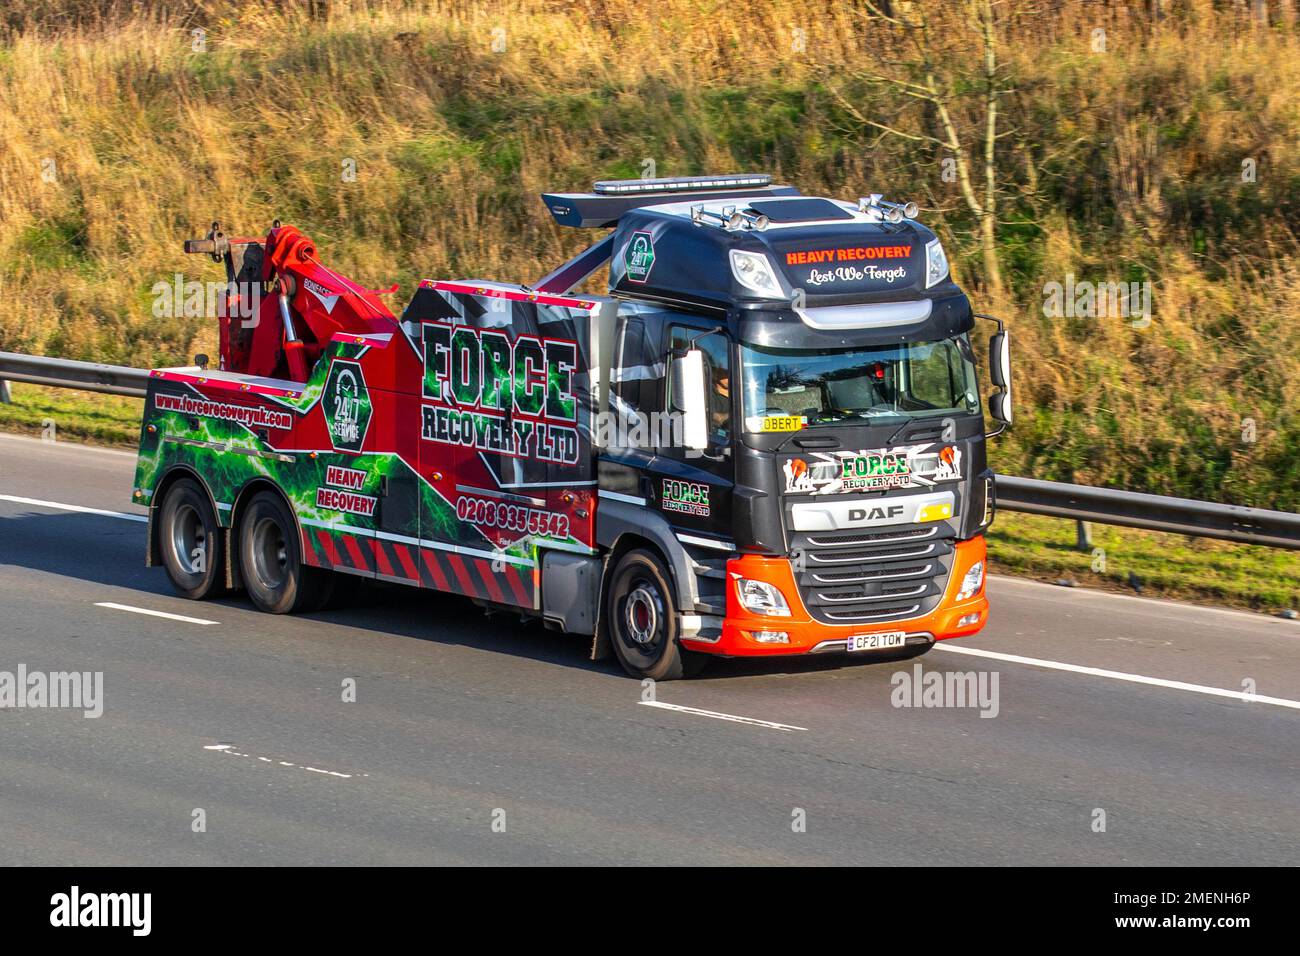 ROBERT Driving FORCE RECOVERY LTD, Heavy DAF HGV roadside 24hr vehicle recovery; travelling on the M61 motorway UK Stock Photo